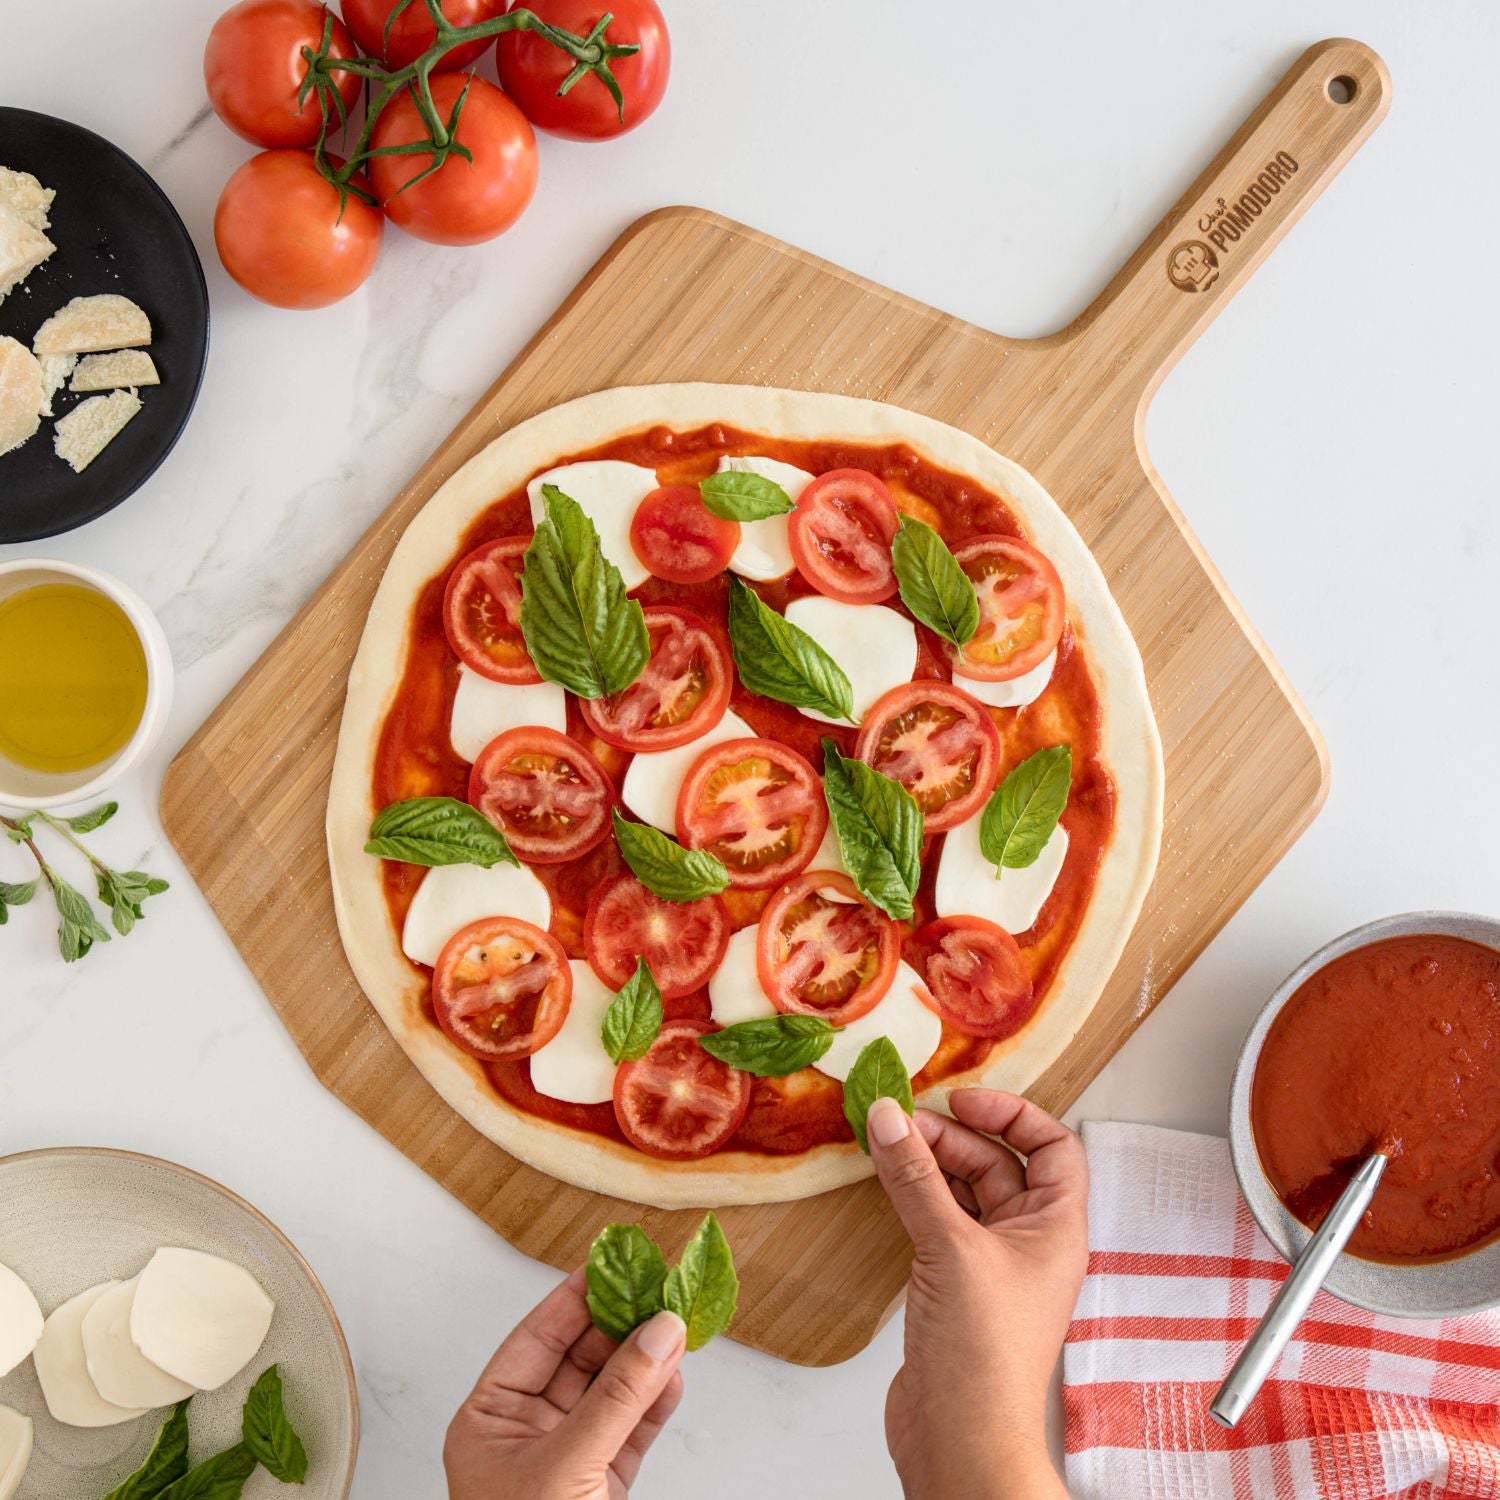 Wooden Sliding Pizza Peel with Handle Hanging Pizza Cutting Board